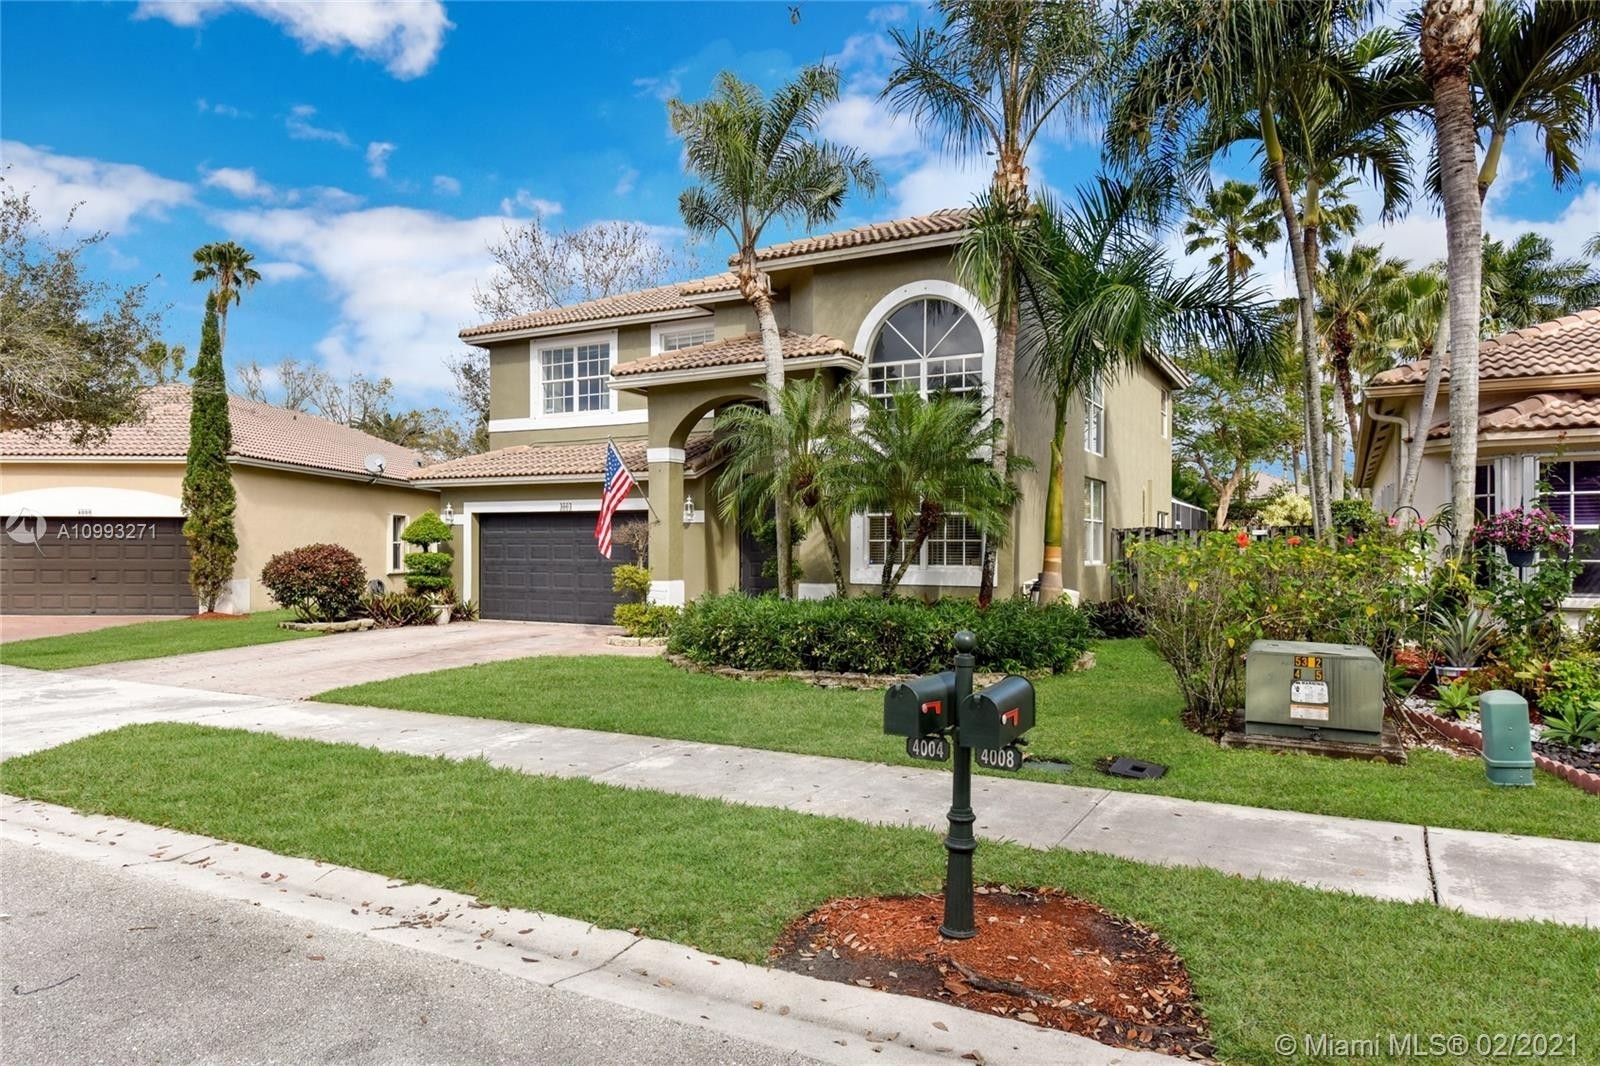 2. Single Family Homes for Sale at Weston, FL 33331